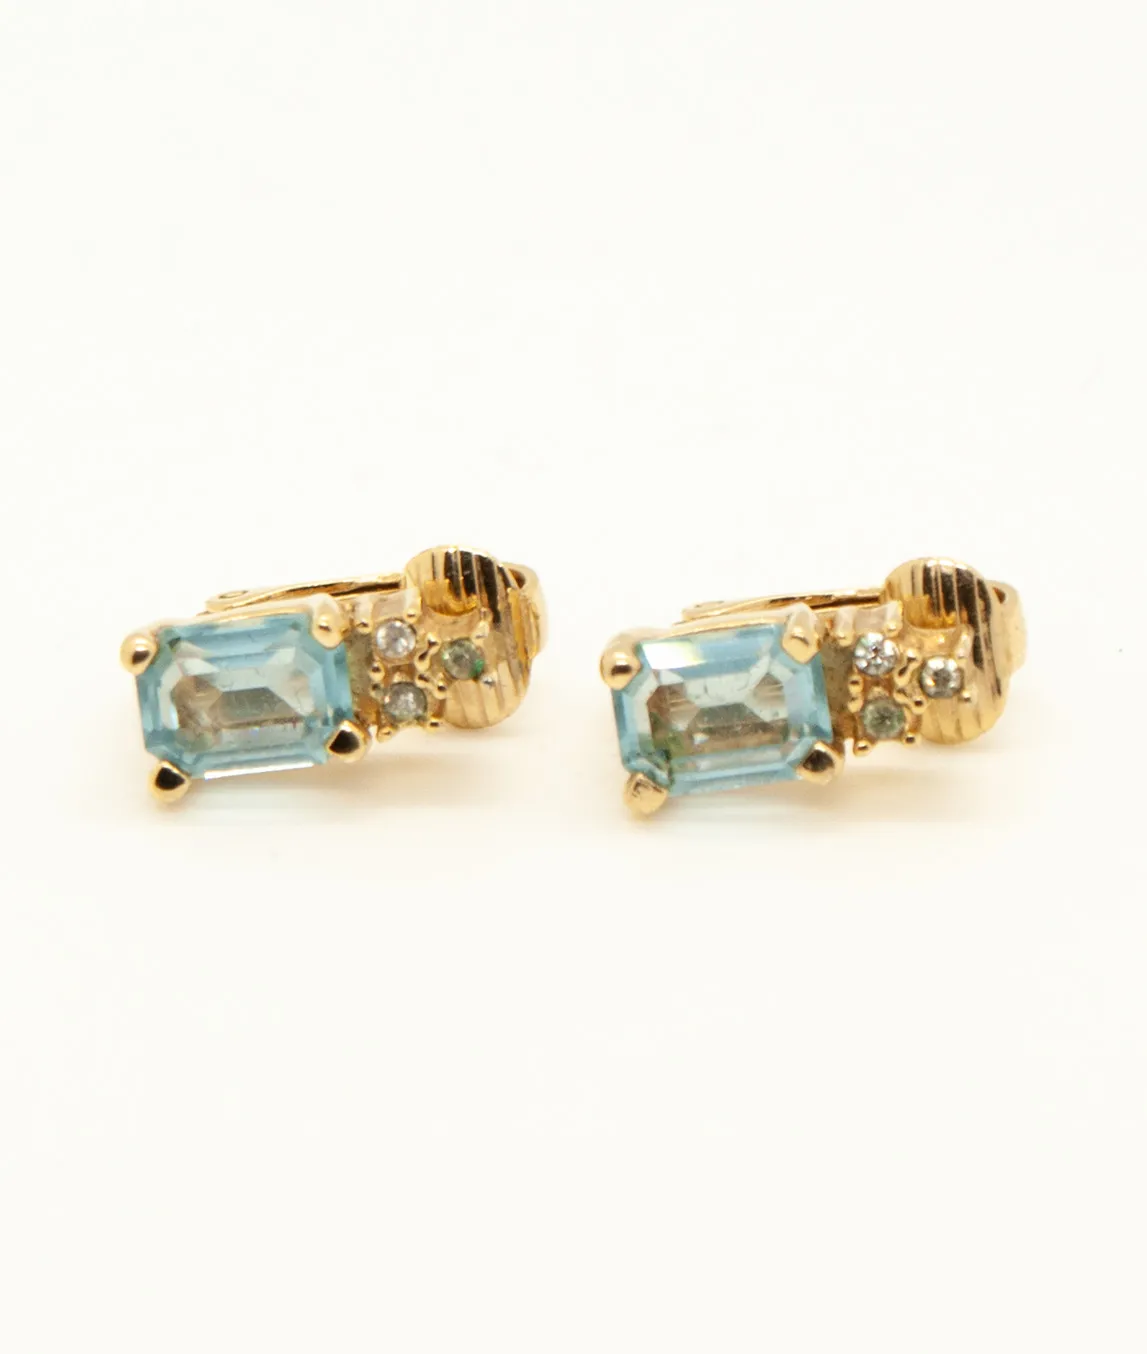 Vintage Dior gold and turquoise earrings